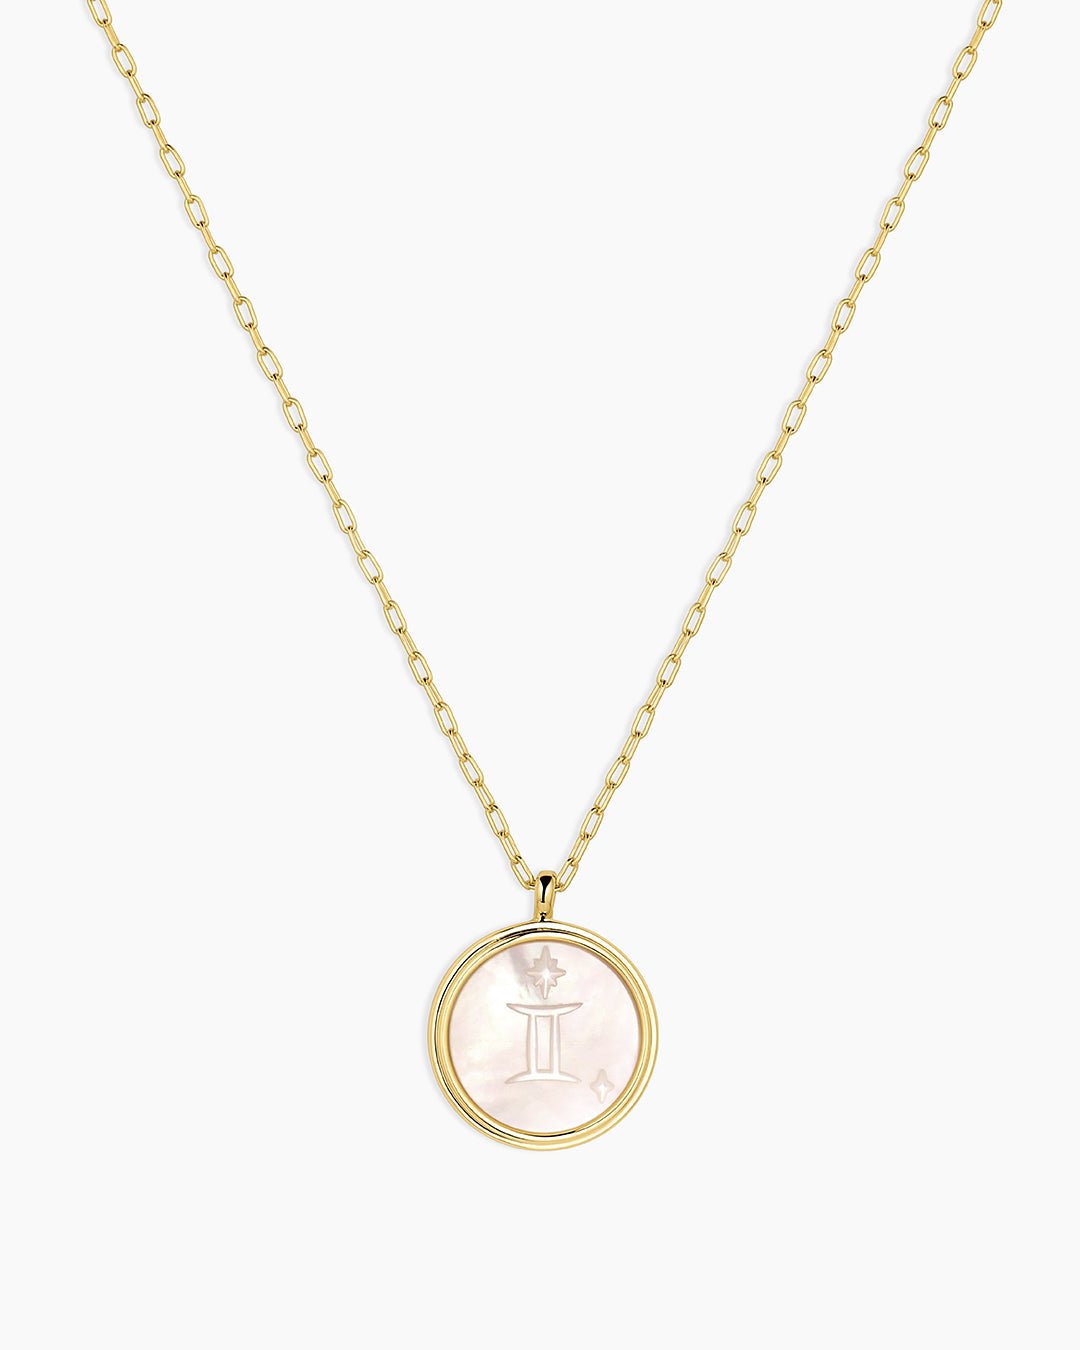 Zodiac Necklace - Scorpio, Astrology Coin Necklace, Scorpio Necklace || option::Gold Plated, Gemini